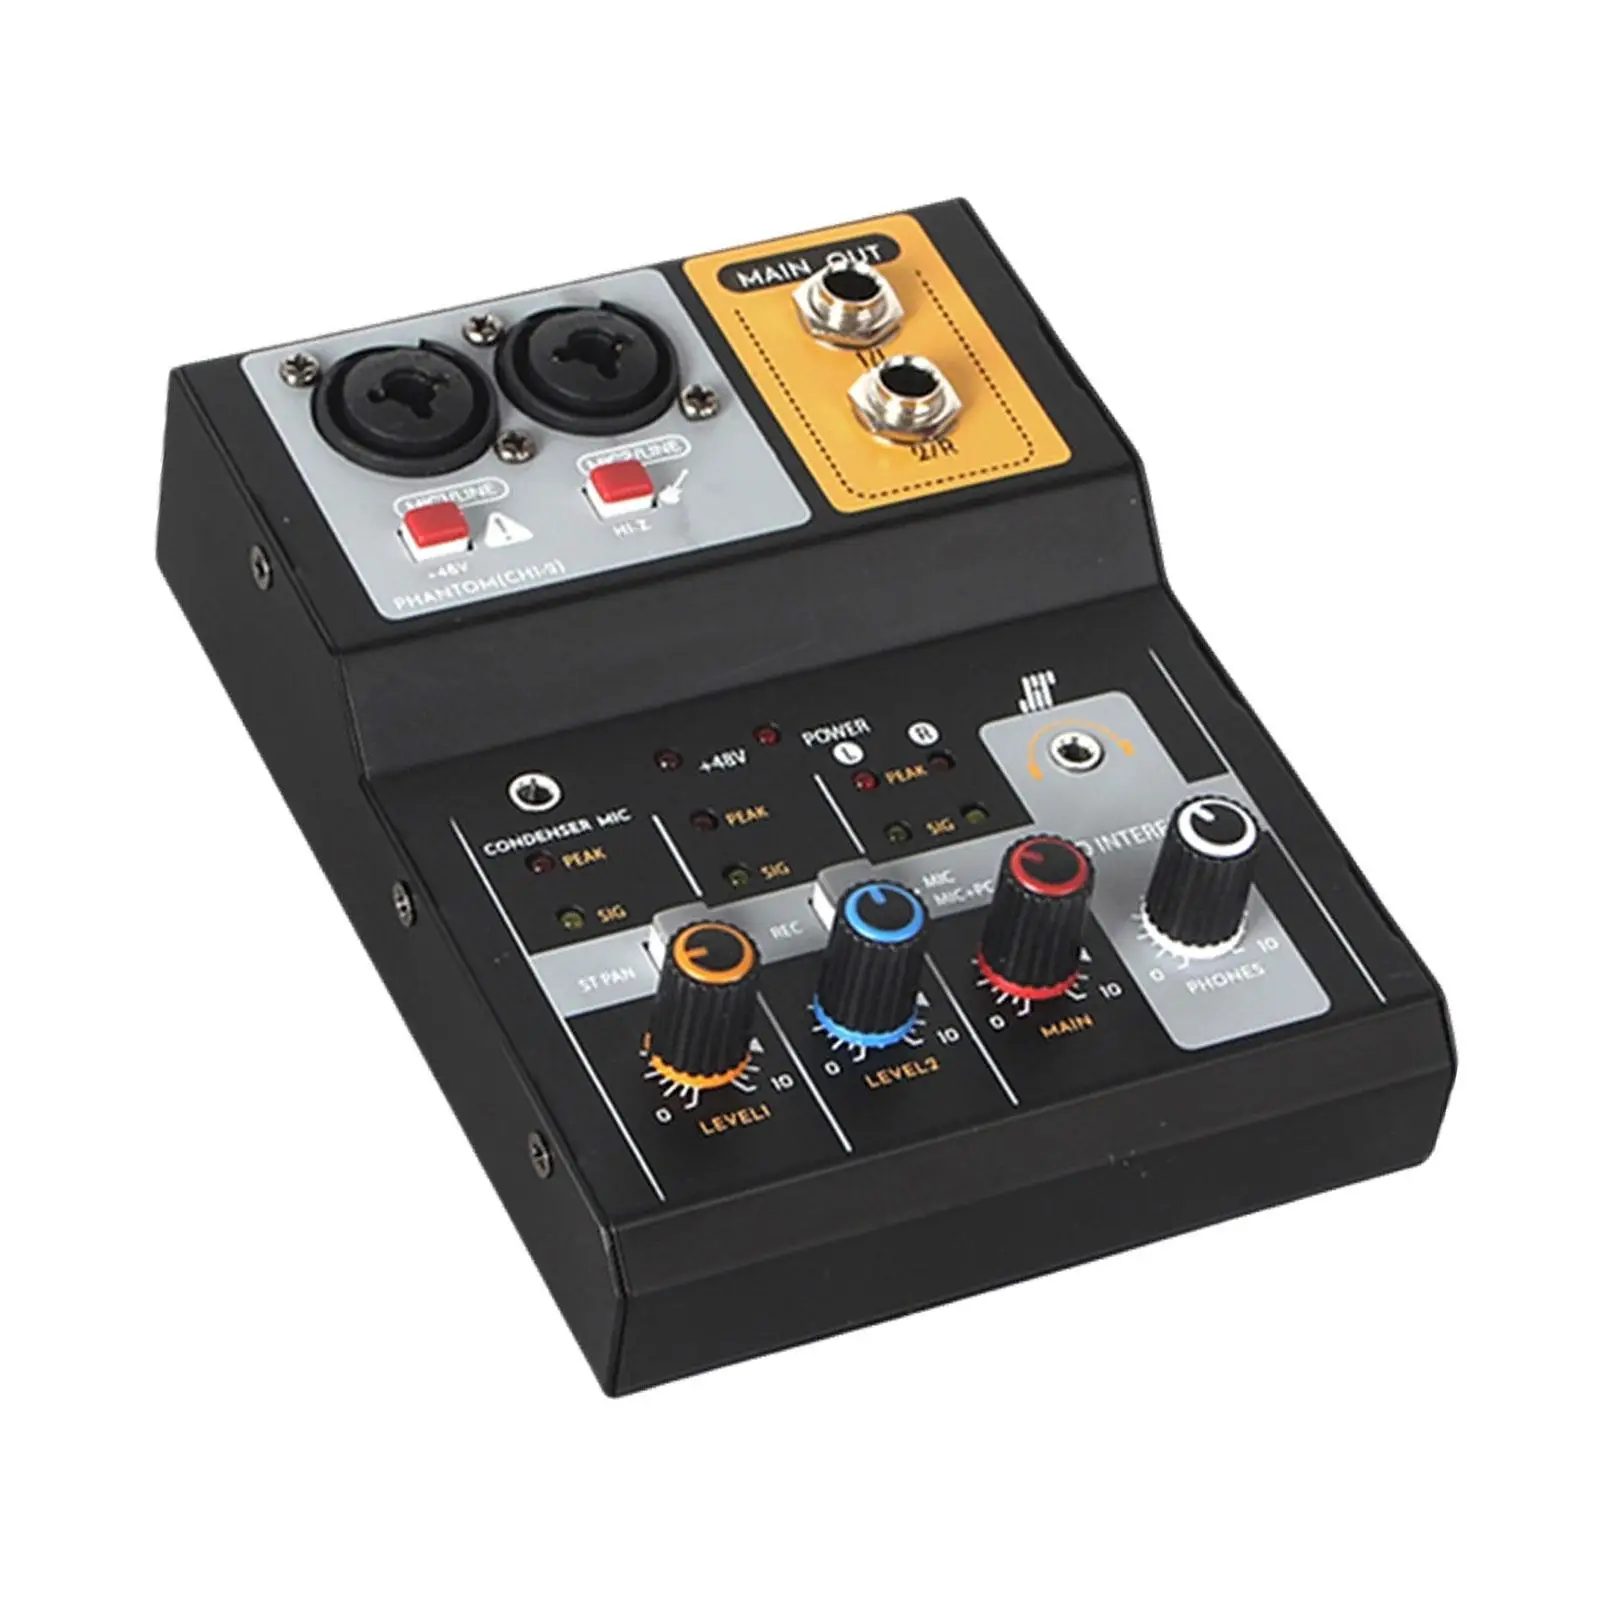 Audio Mixer Controller USB Compact Portable Stereo 2 Channel Audio Sound Mixer for Live Show Stereo Recording Podcasting